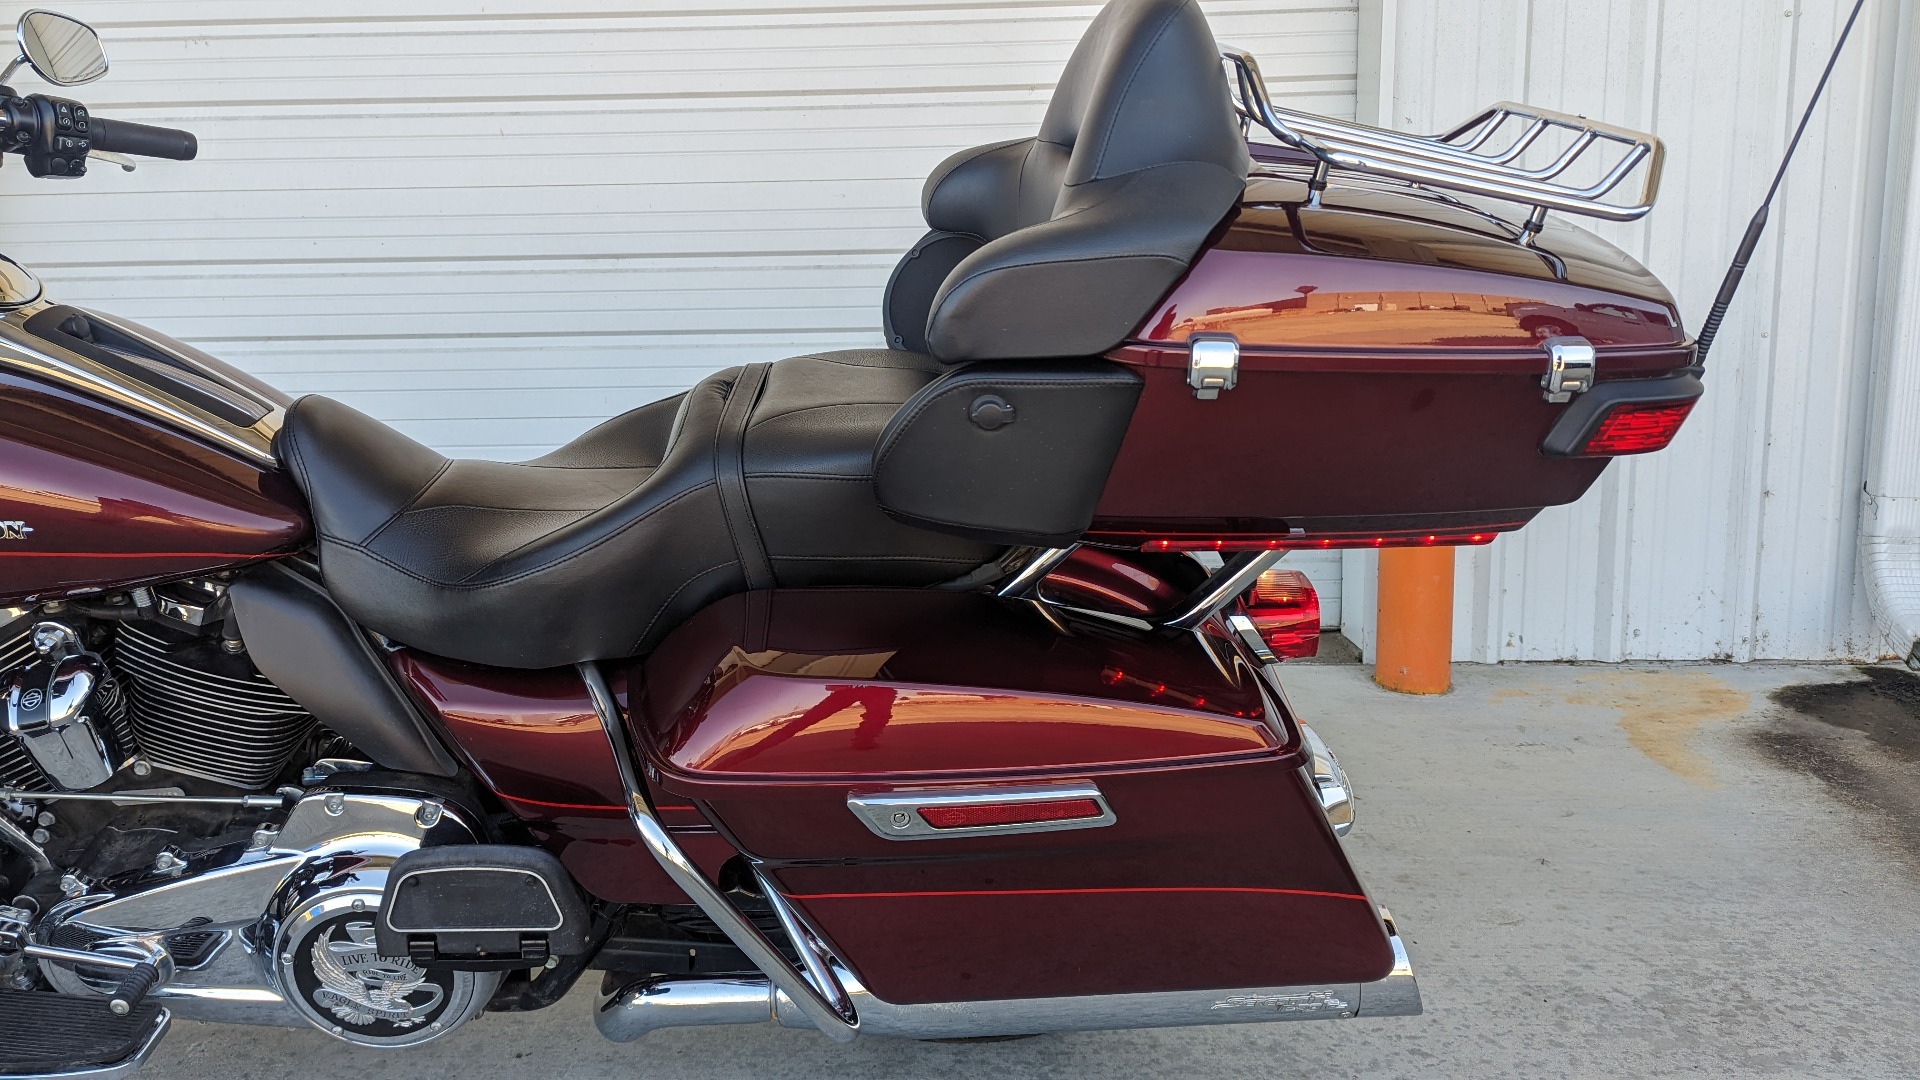 2017 harley davidson ultra limited for sale in little rock - Photo 8